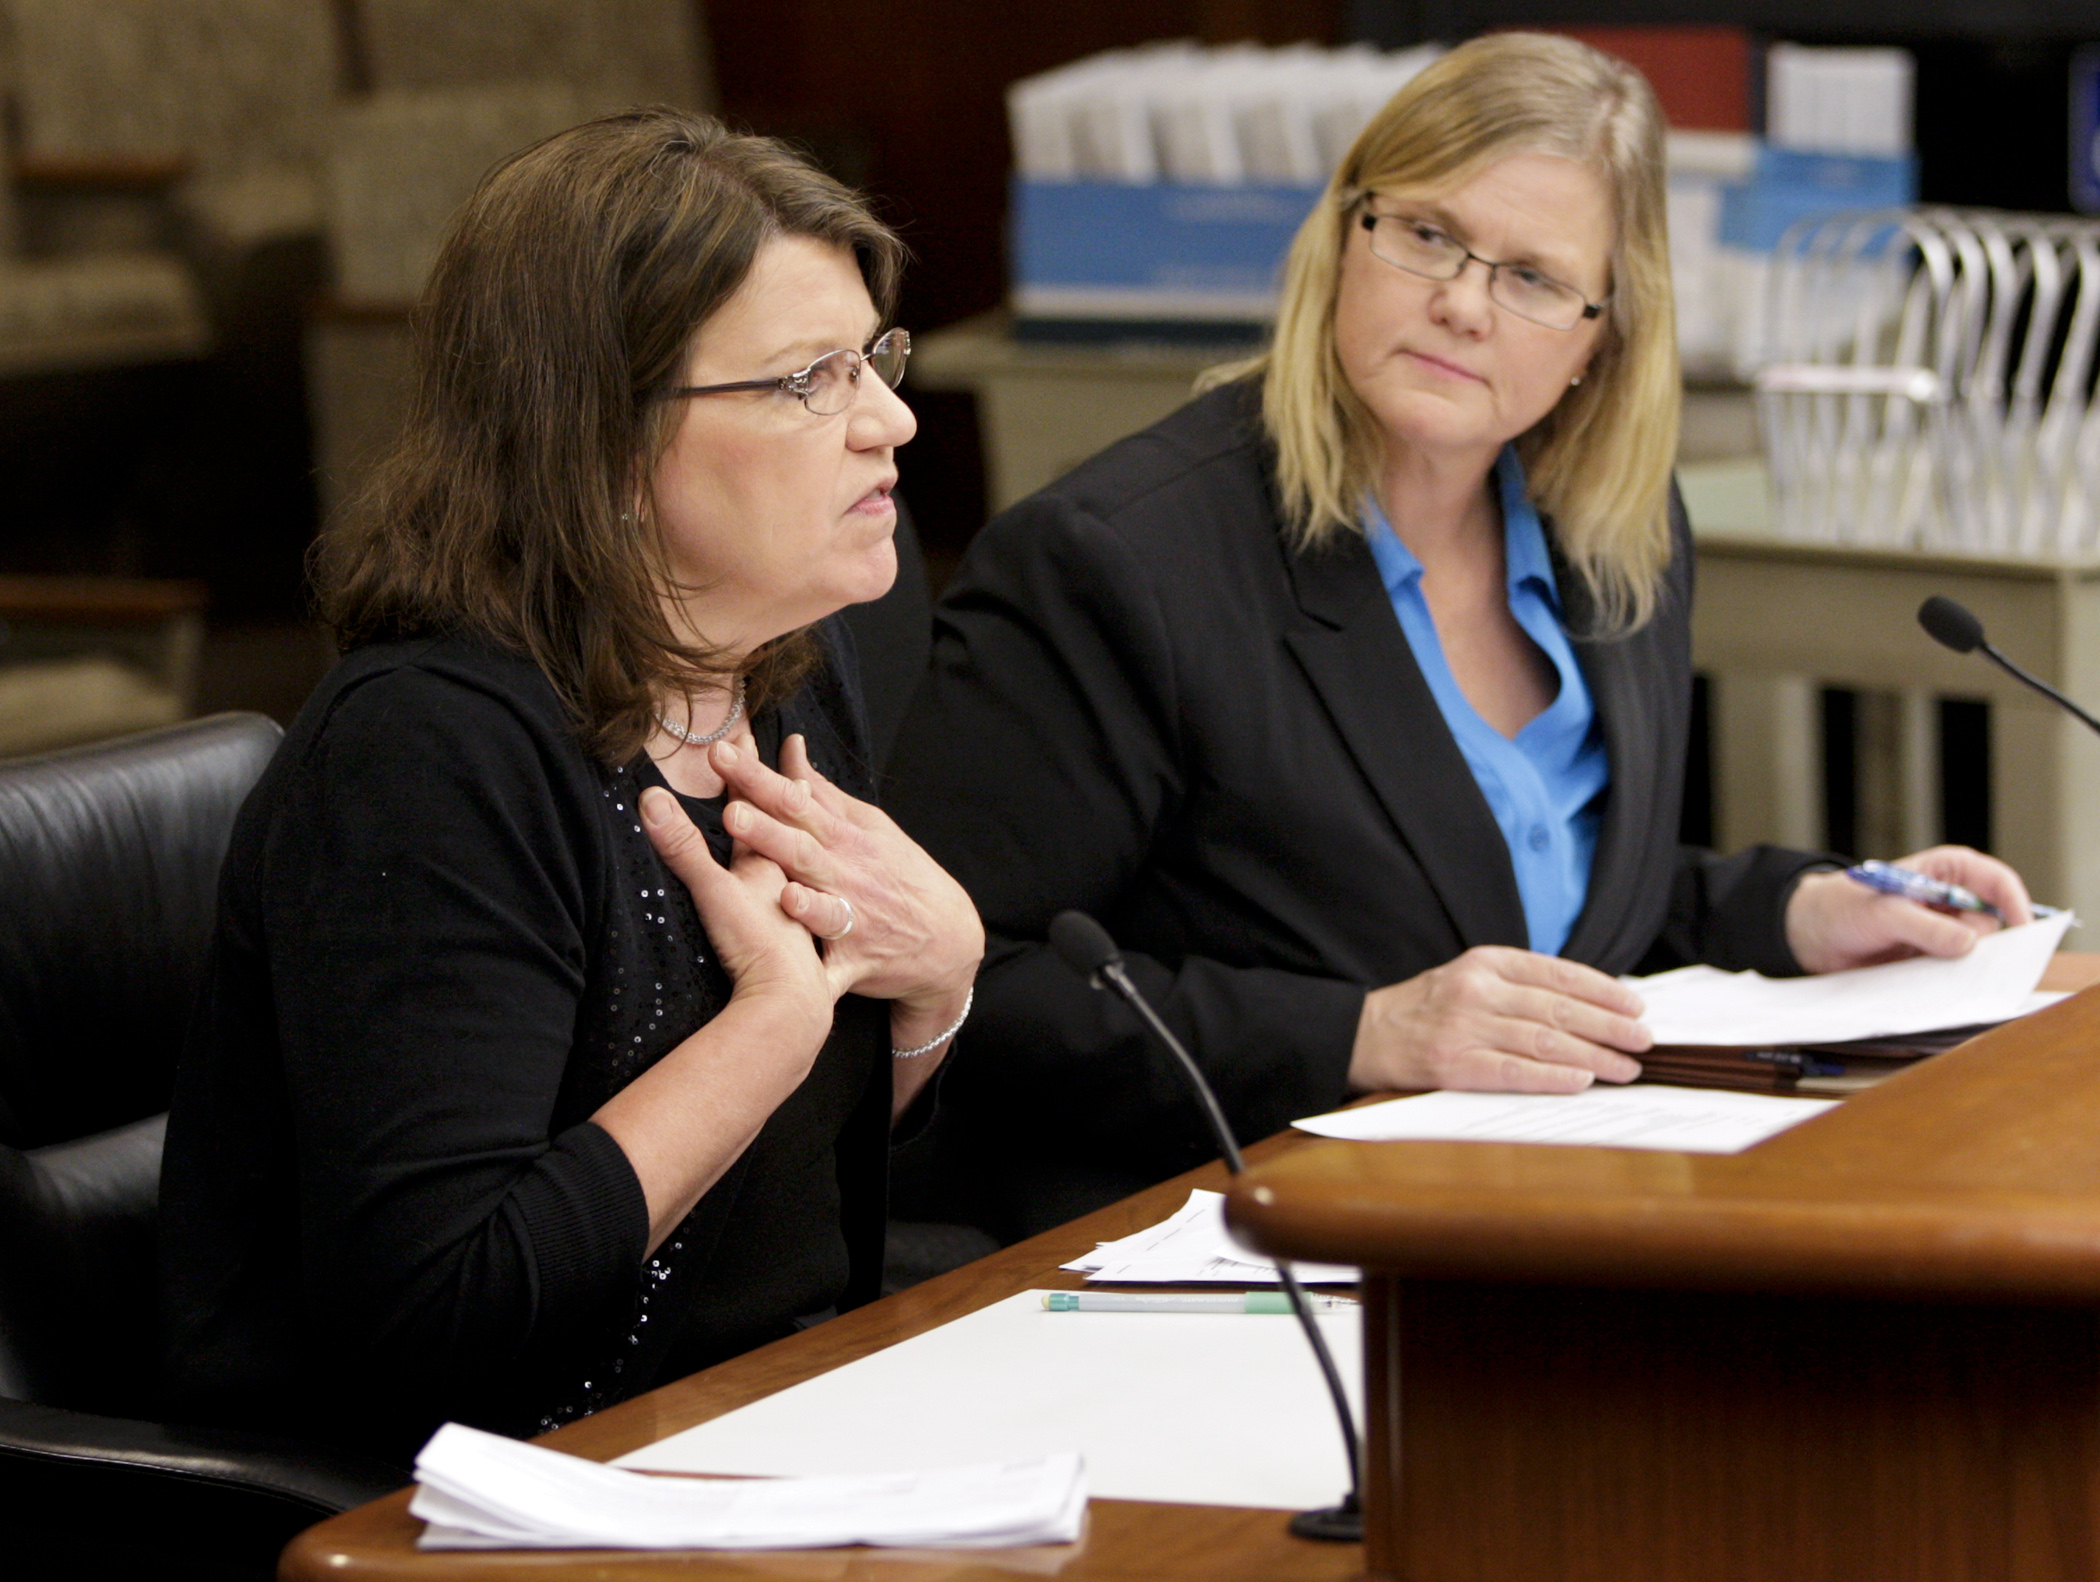 Patricia Maahs relates her personal story March 11 while speaking in support of HF889, sponsored by Rep. Debra Hilstrom, right, which would expand the definition of fifth-degree criminal sexual conduct. Photo by Paul Battaglia